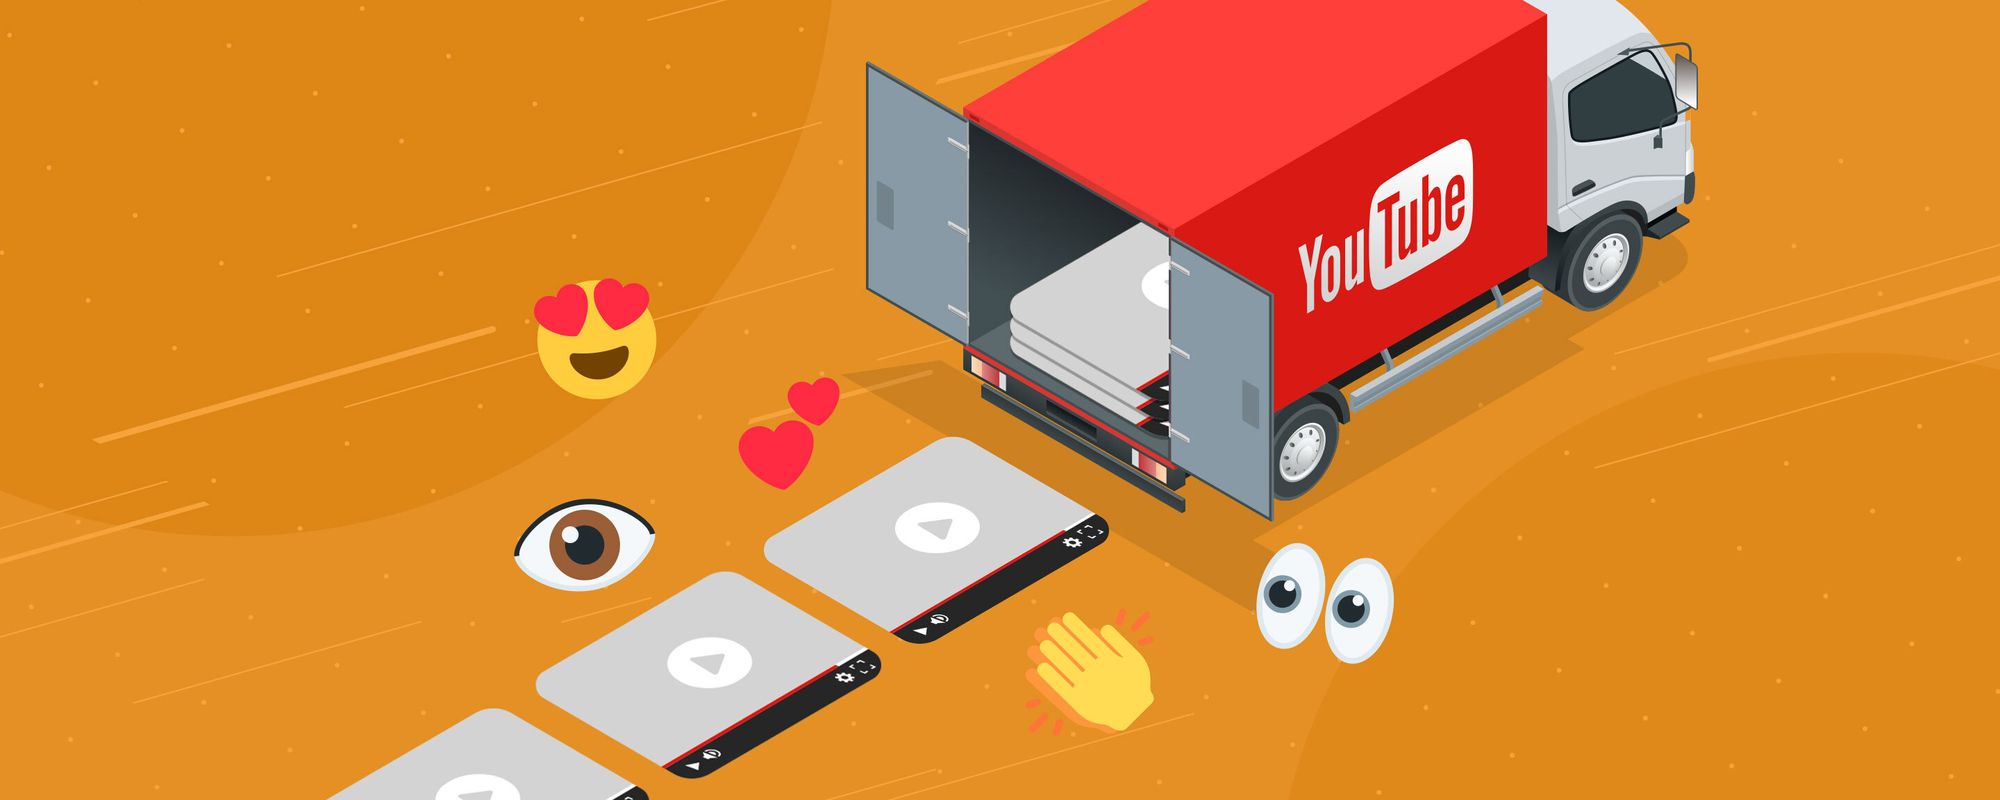 Image showing a YouTube-branded truck to visualise how YouTube serves impressions.